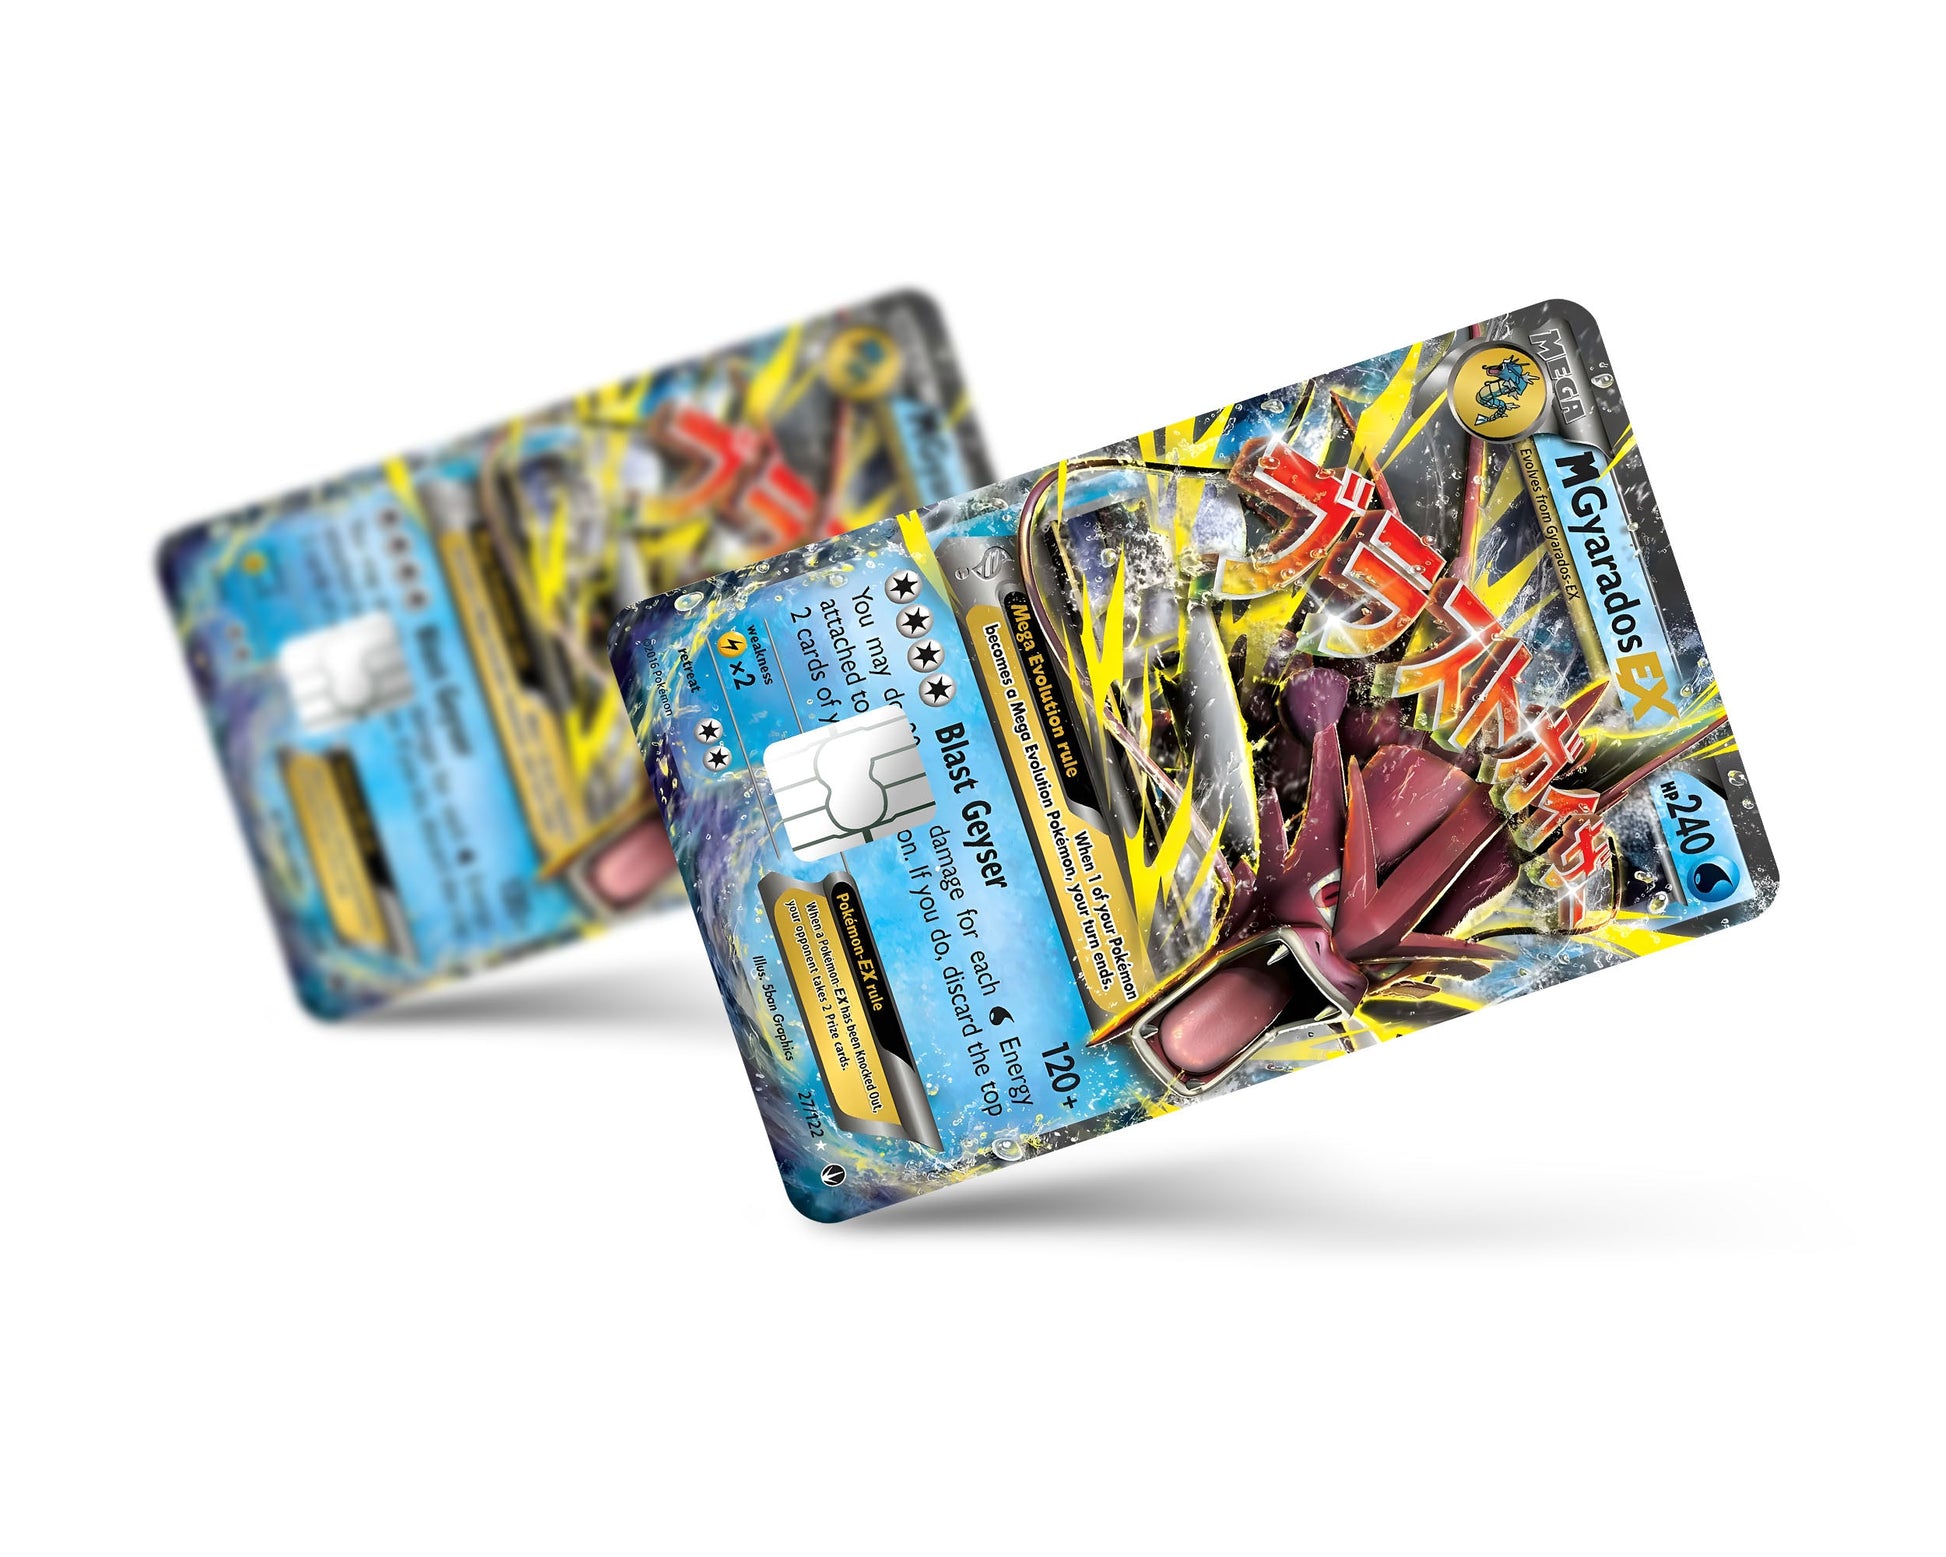 Ditto Pokemon Card Credit Card Credit Card Skin – Anime Town Creations